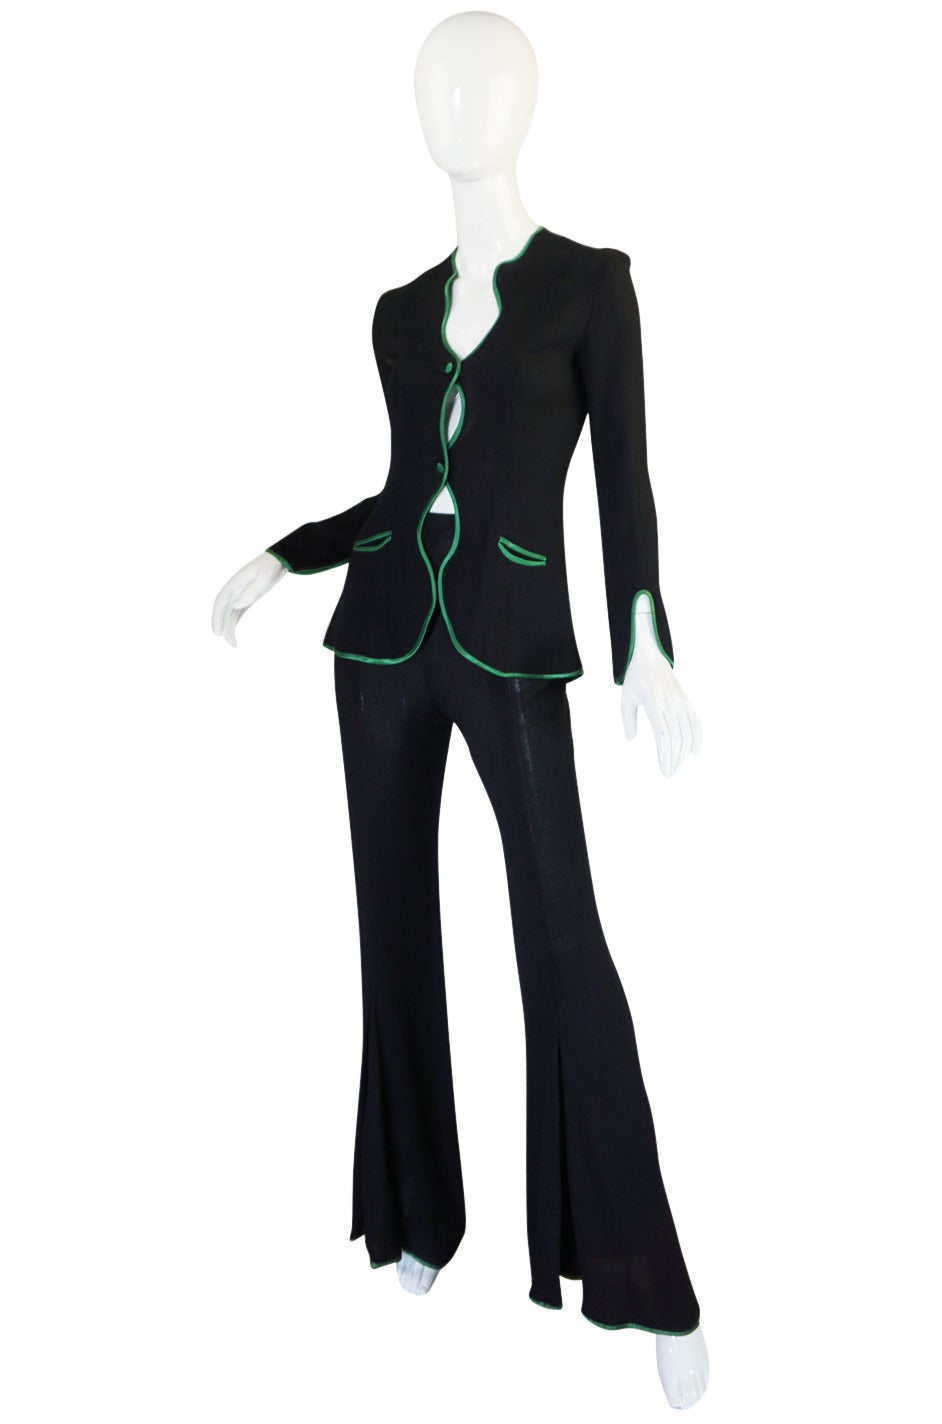 This is a classic design from Ossie Clark and I am pleased to have two versions of this land in the shop - this one with a green trim and a second with a yellow trim. I love the subtle sexiness of the suit - the 